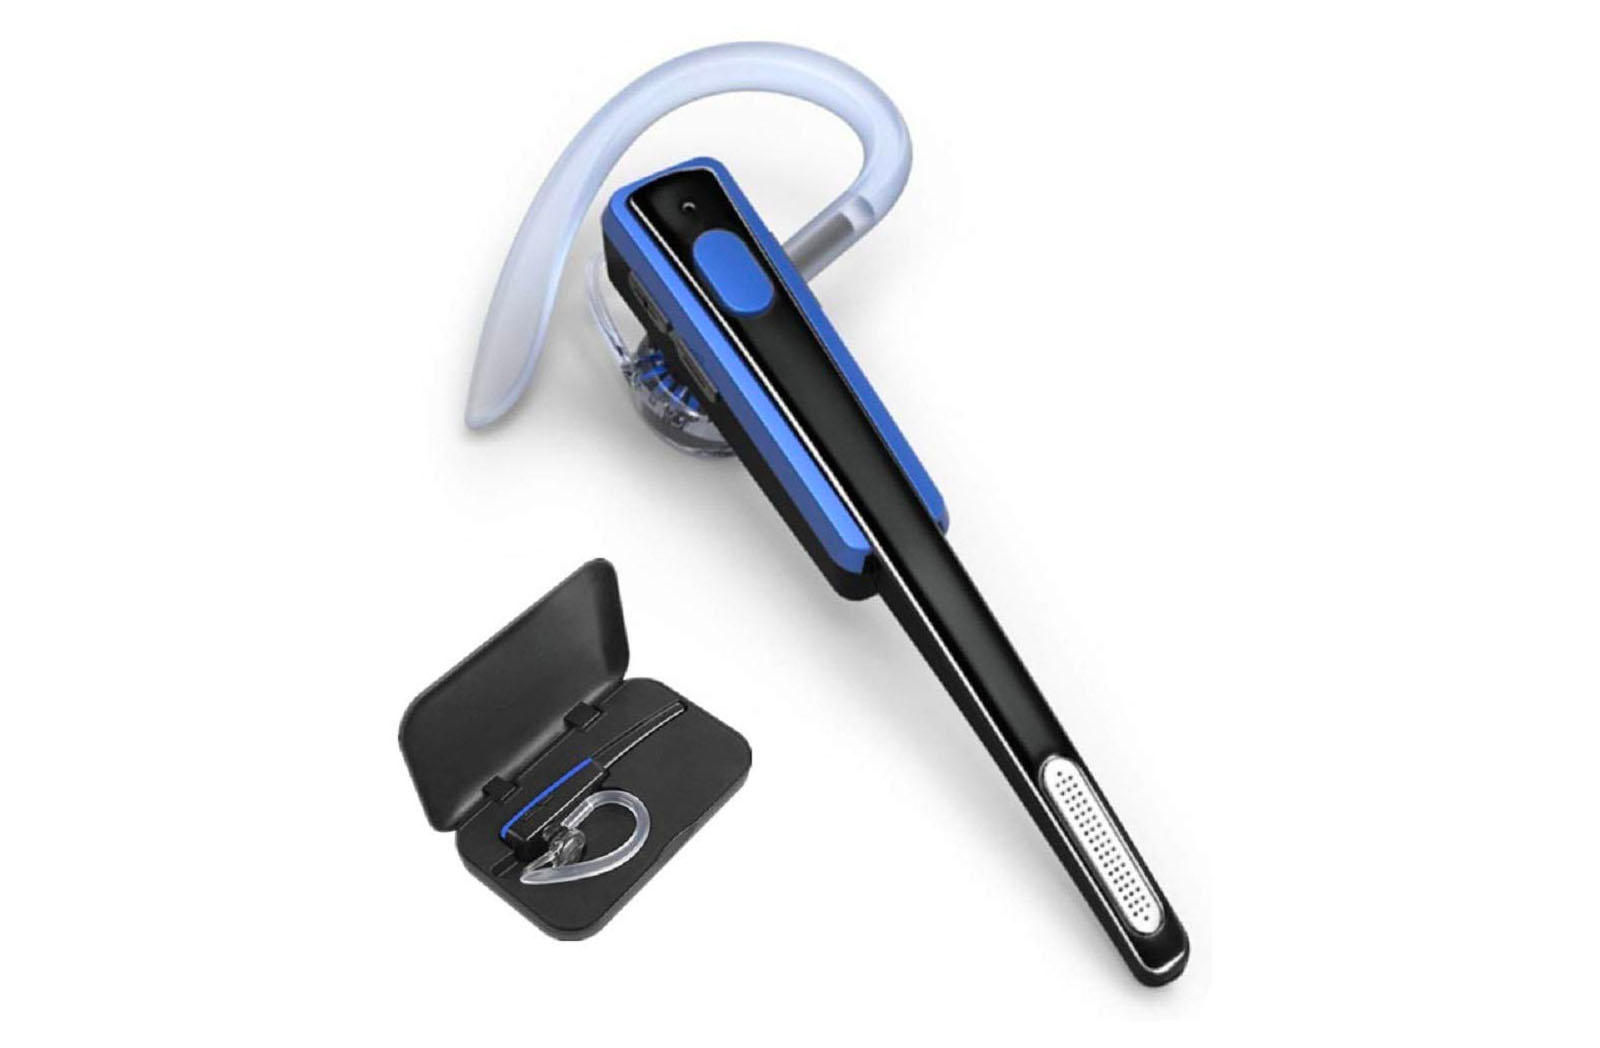 usb wireless headphones with mic for pc